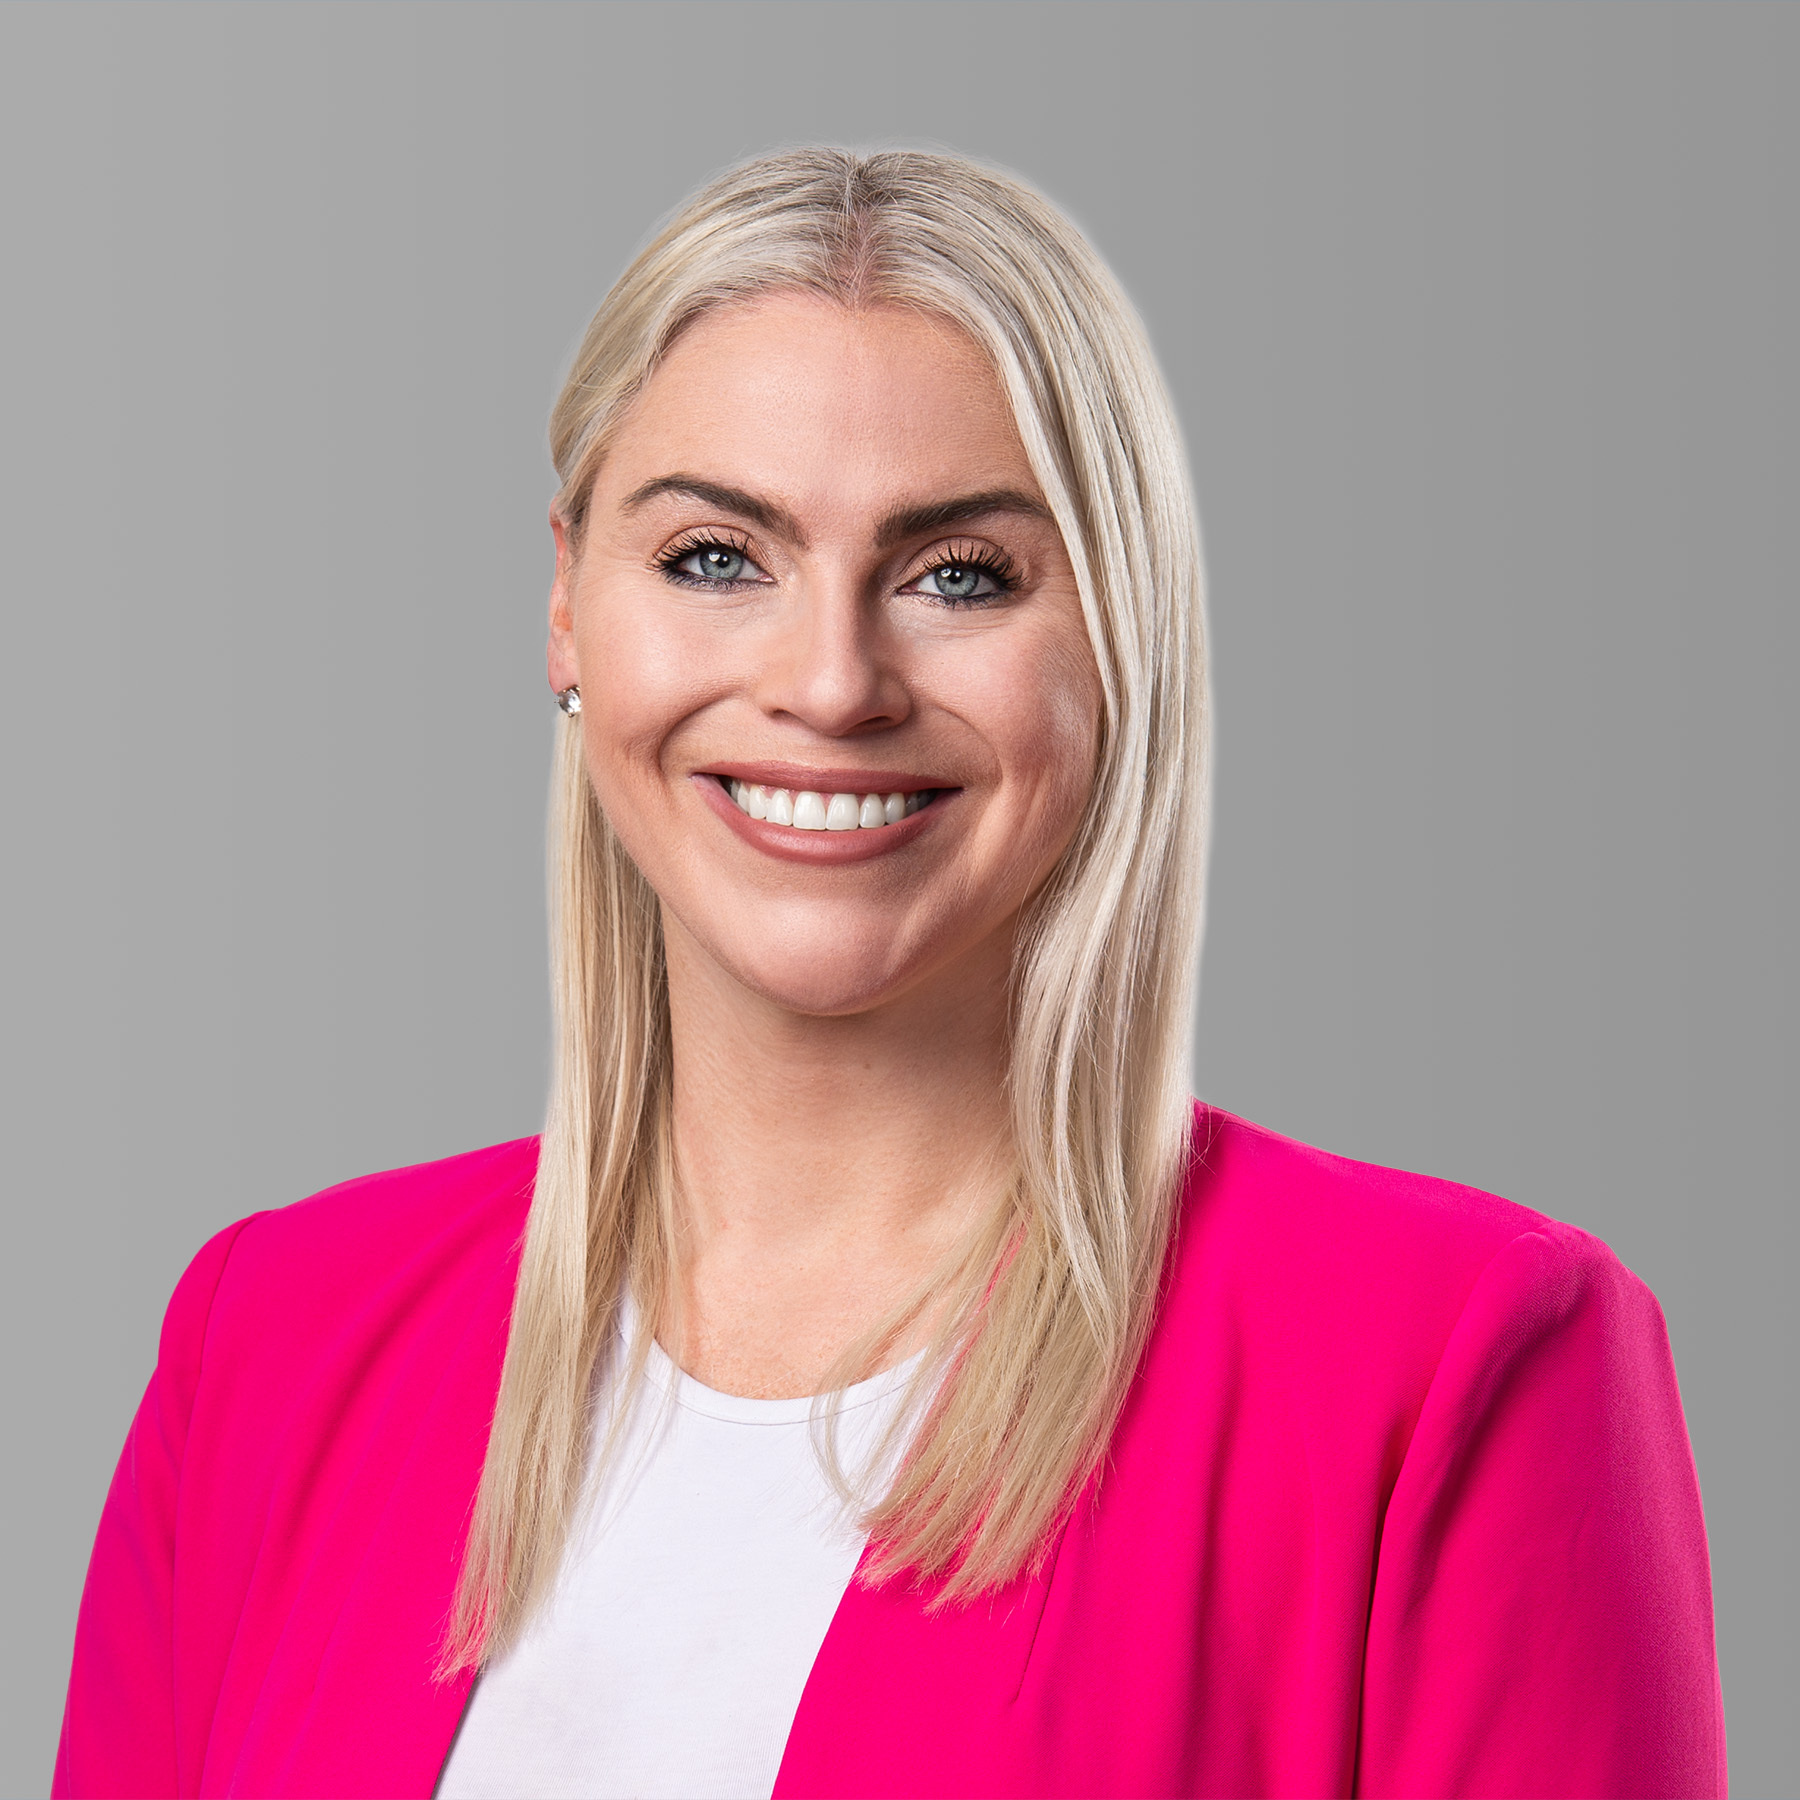 Profile picture of Jessica Adamovich family lawyer in Sydney